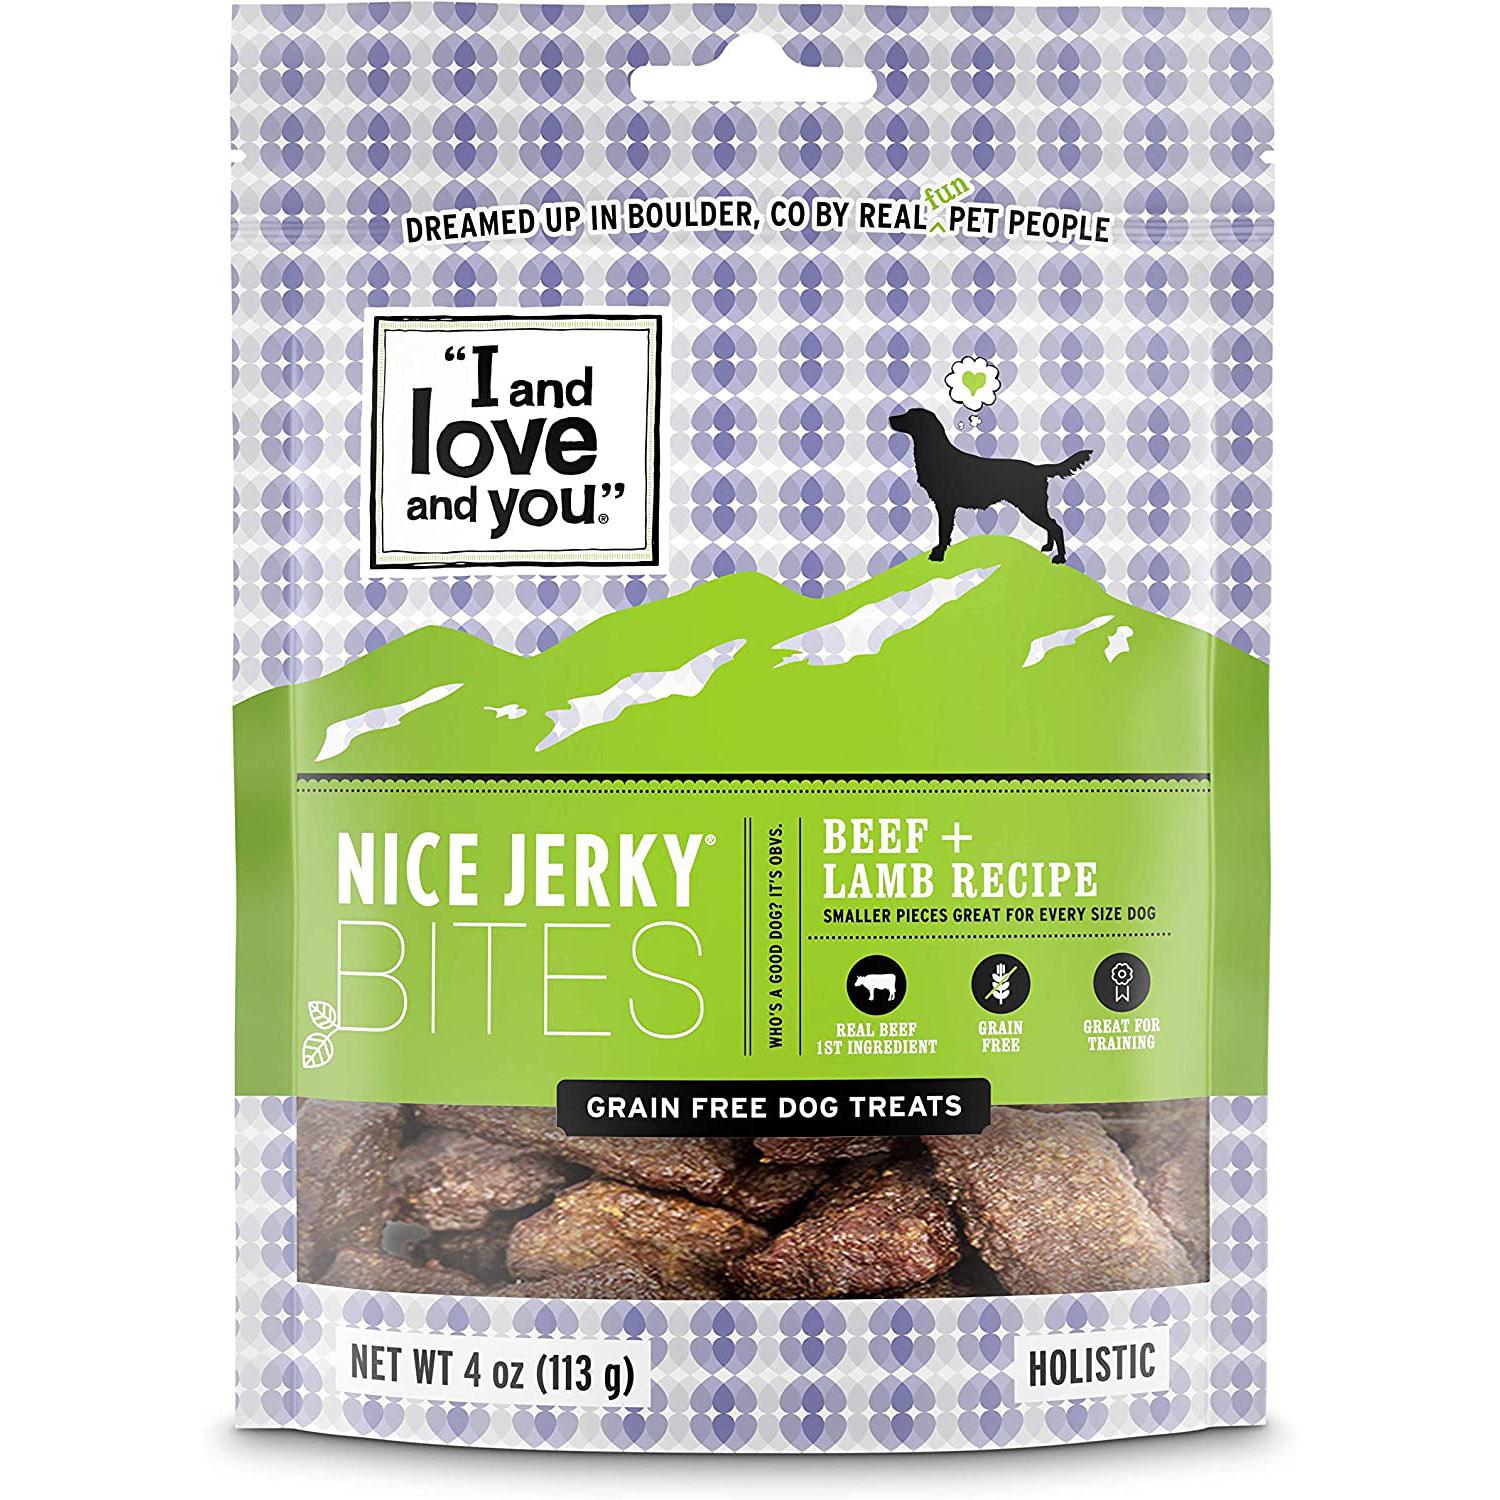 I and Love and You Nice Jerky Bites Grain Free Dog Treats for $2.56 Shipped